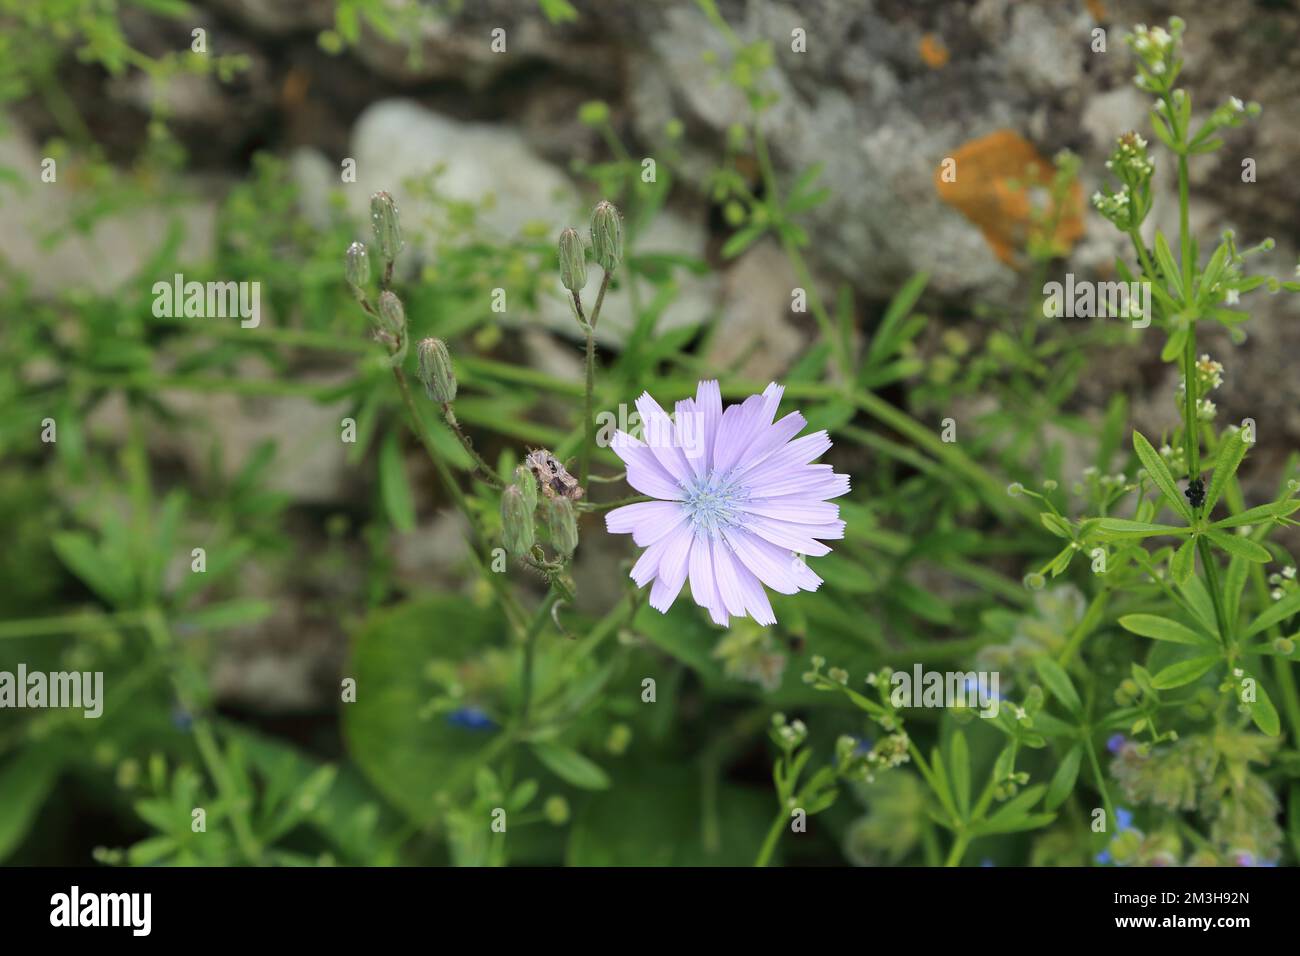 Flowering chicory plant (cichorium intybus) also known as blue daisy, blue dandelion, coffee weed, horseweed, ragged sailors, wild endive etc growing Stock Photo